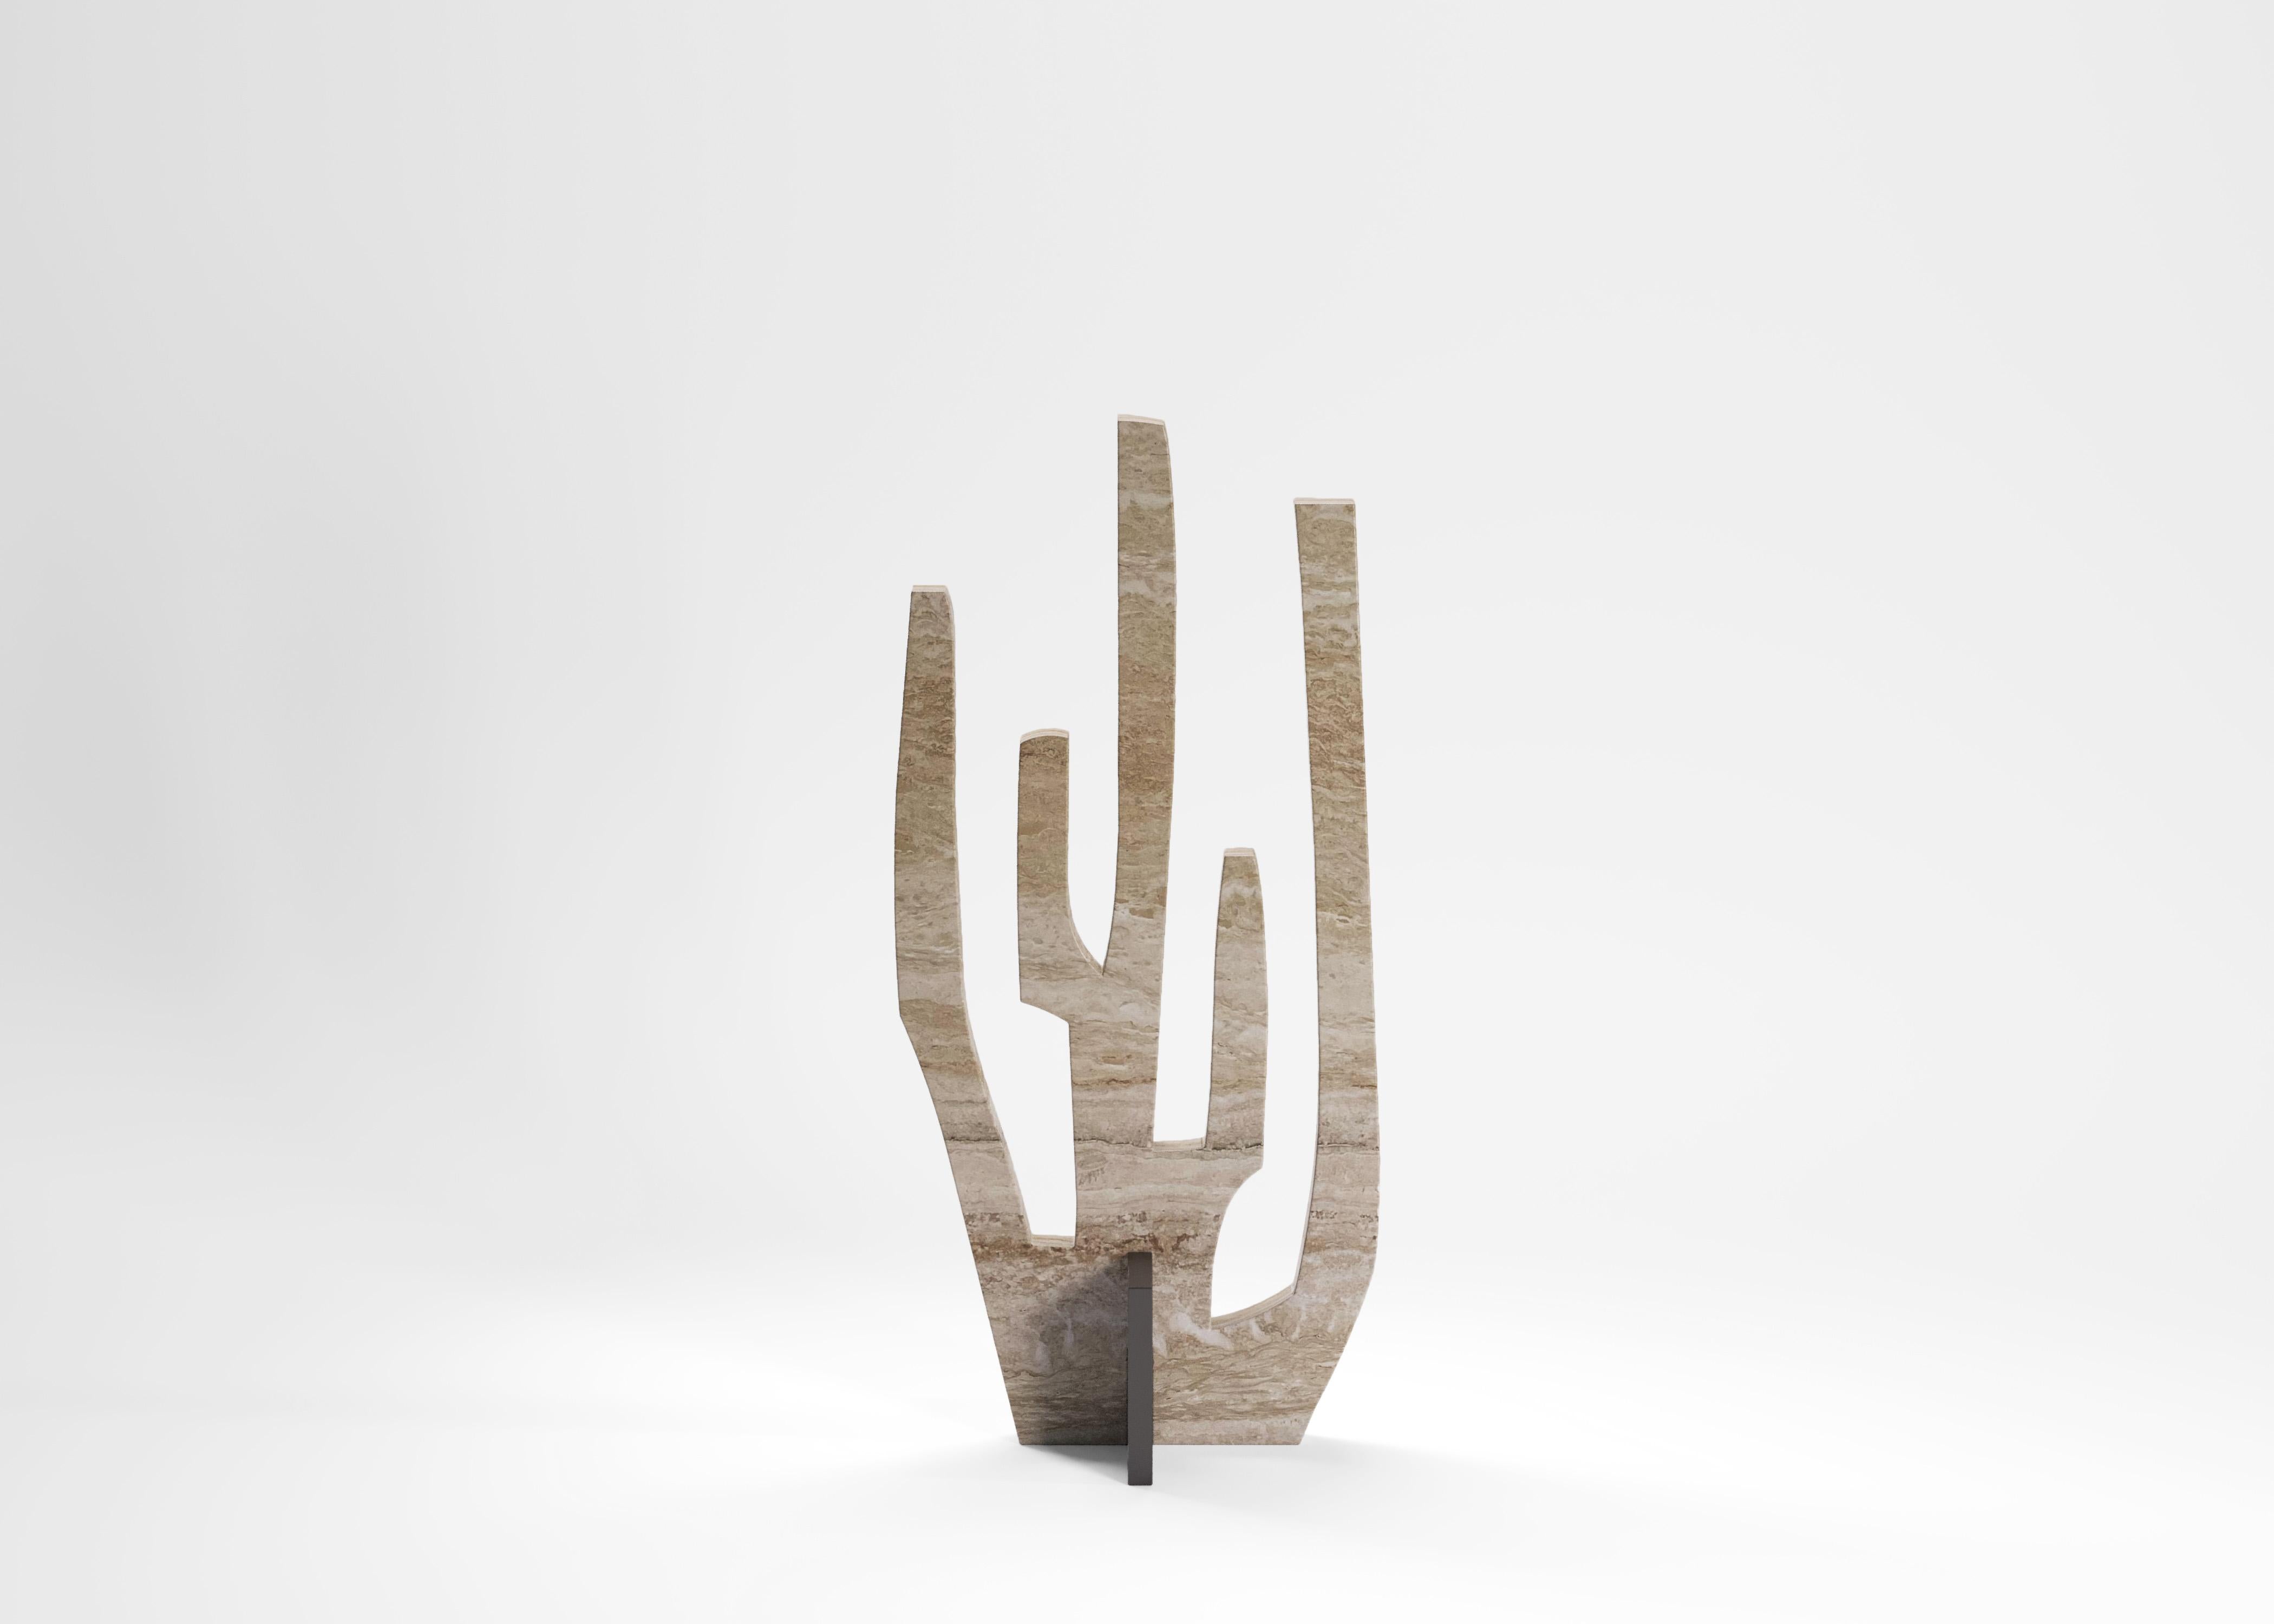 Coral sculpture by Edizione Limitata
Limited edition of 150 pieces. Signed and numbered.
Designers: Simone Fanciullacci 
Dimensions: H 42 × W 12 × L 20 cm
Materials: Travertine, metal

Edizione Limitata, that is to say “Limited Edition”, is a